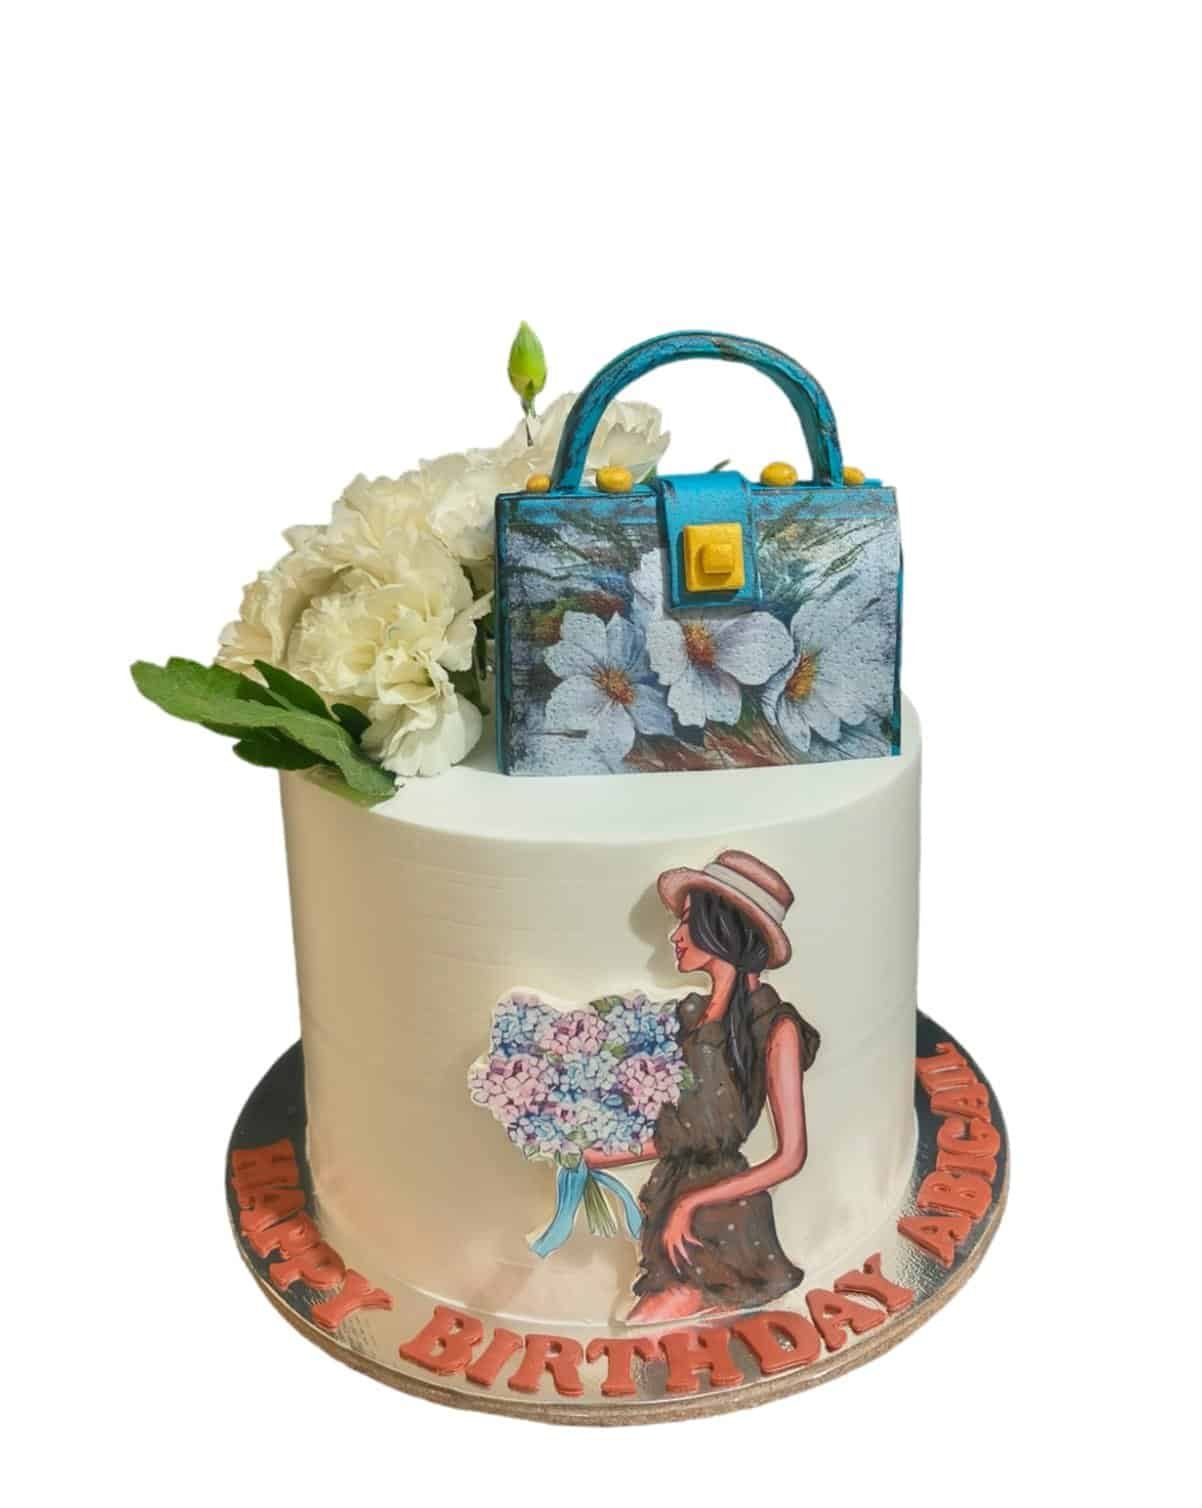 Stylish Juicy Couture Cake with Purse on Top